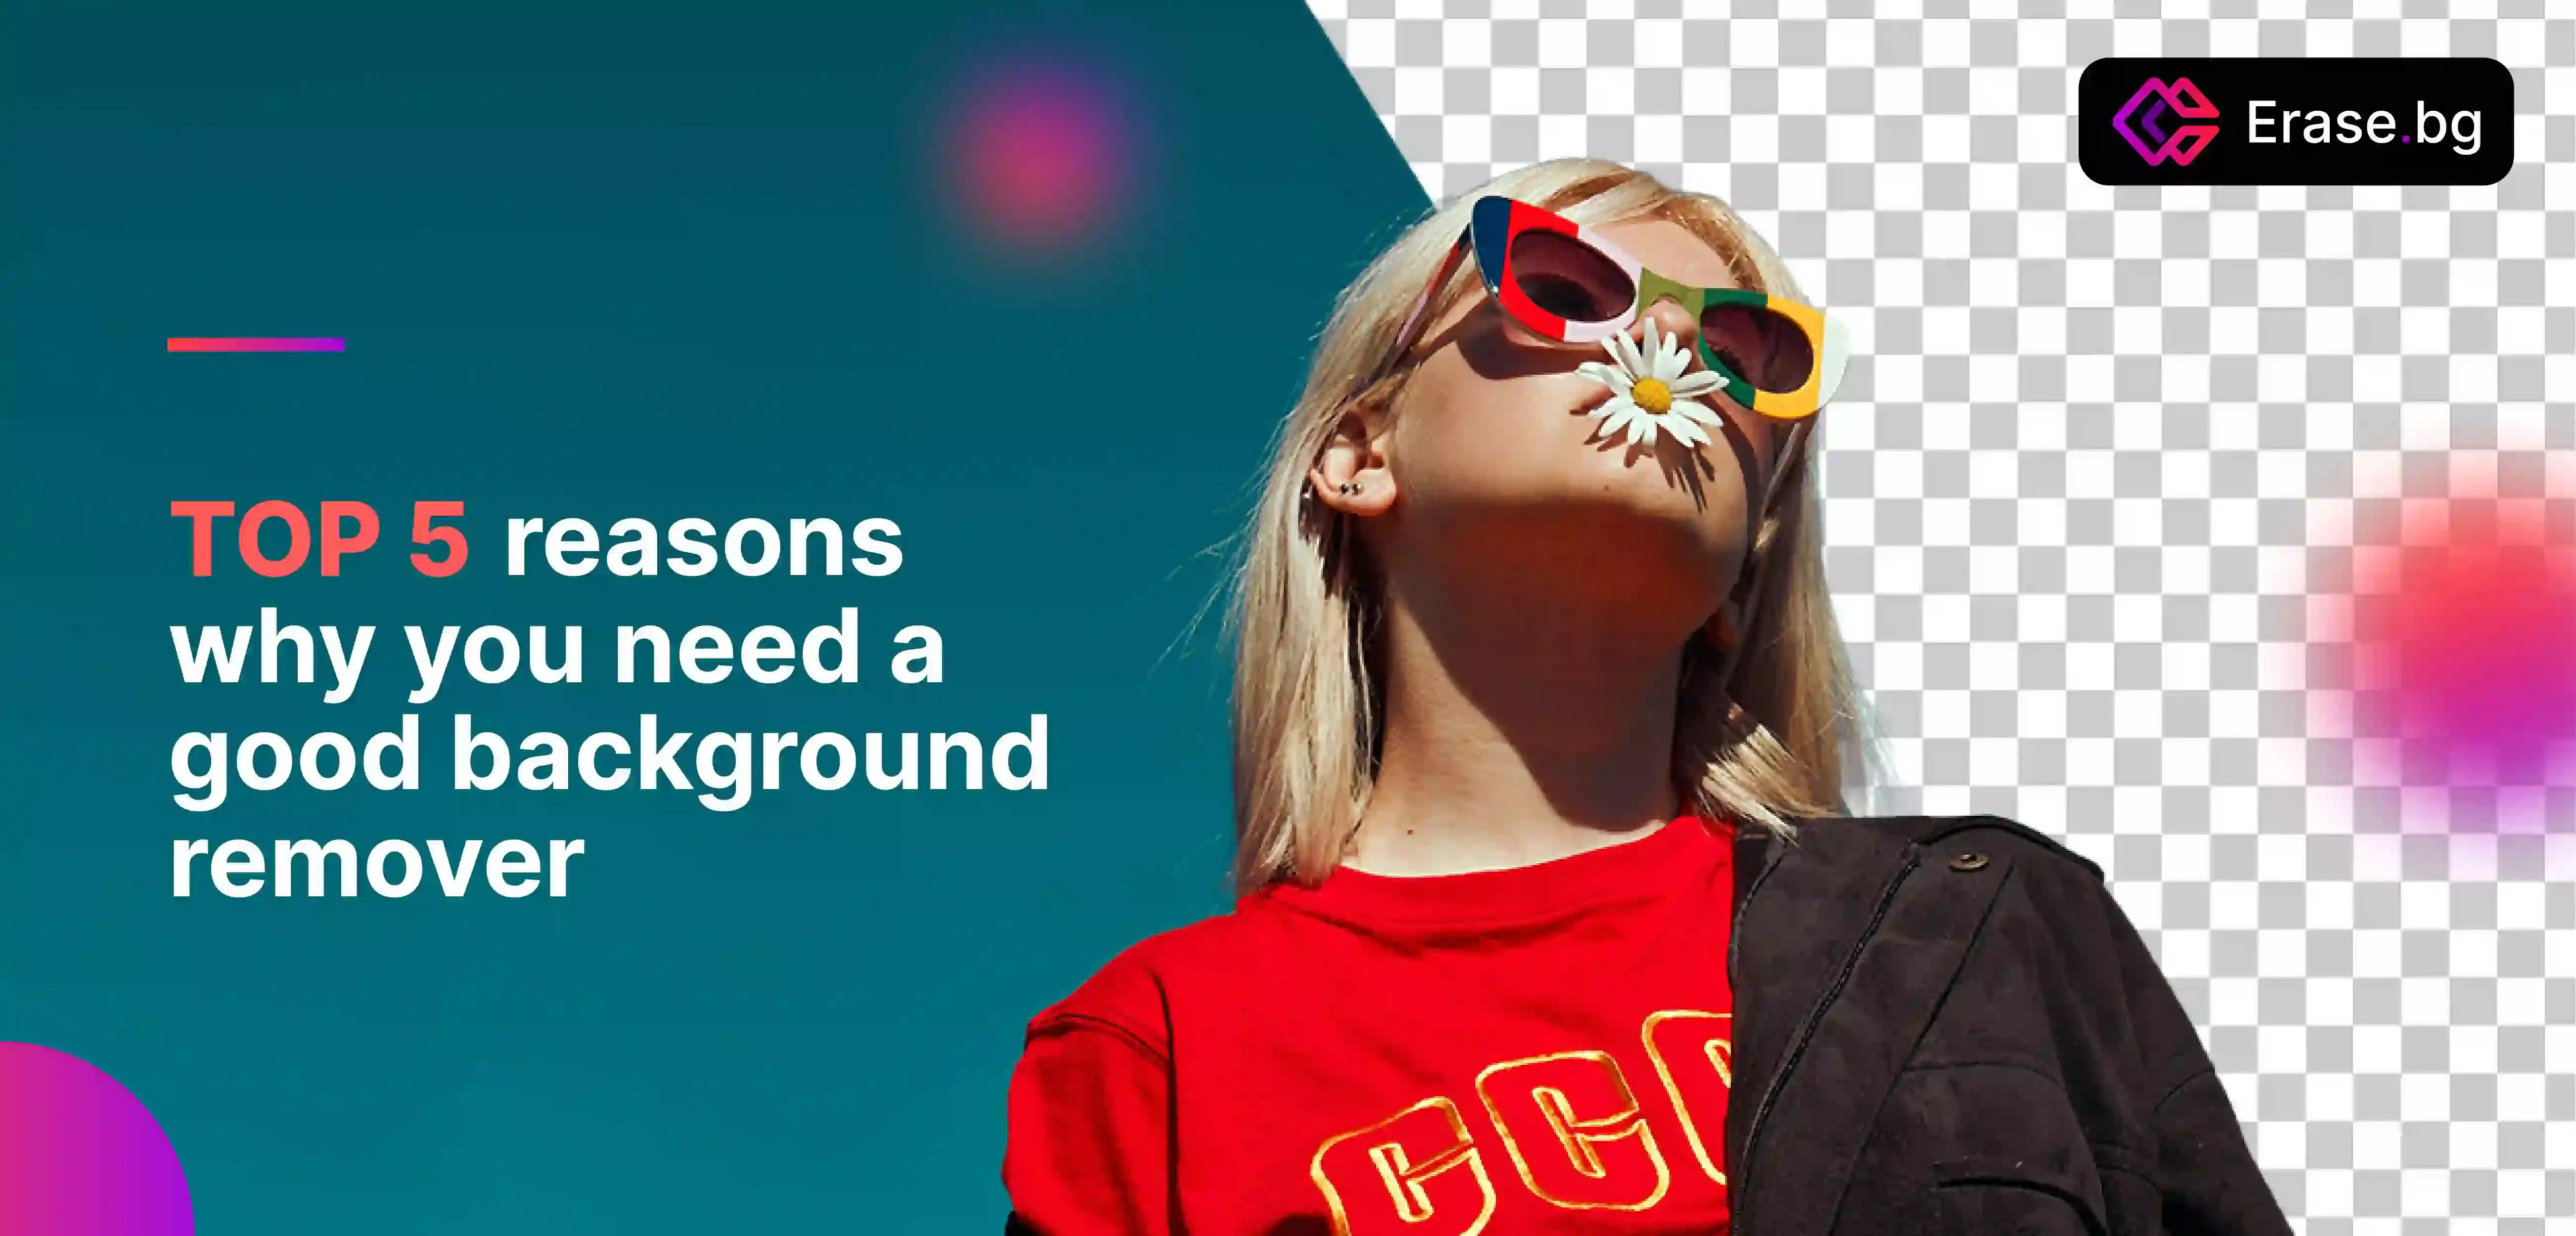 Top 5 Reasons Why You Need a Good Background Remover